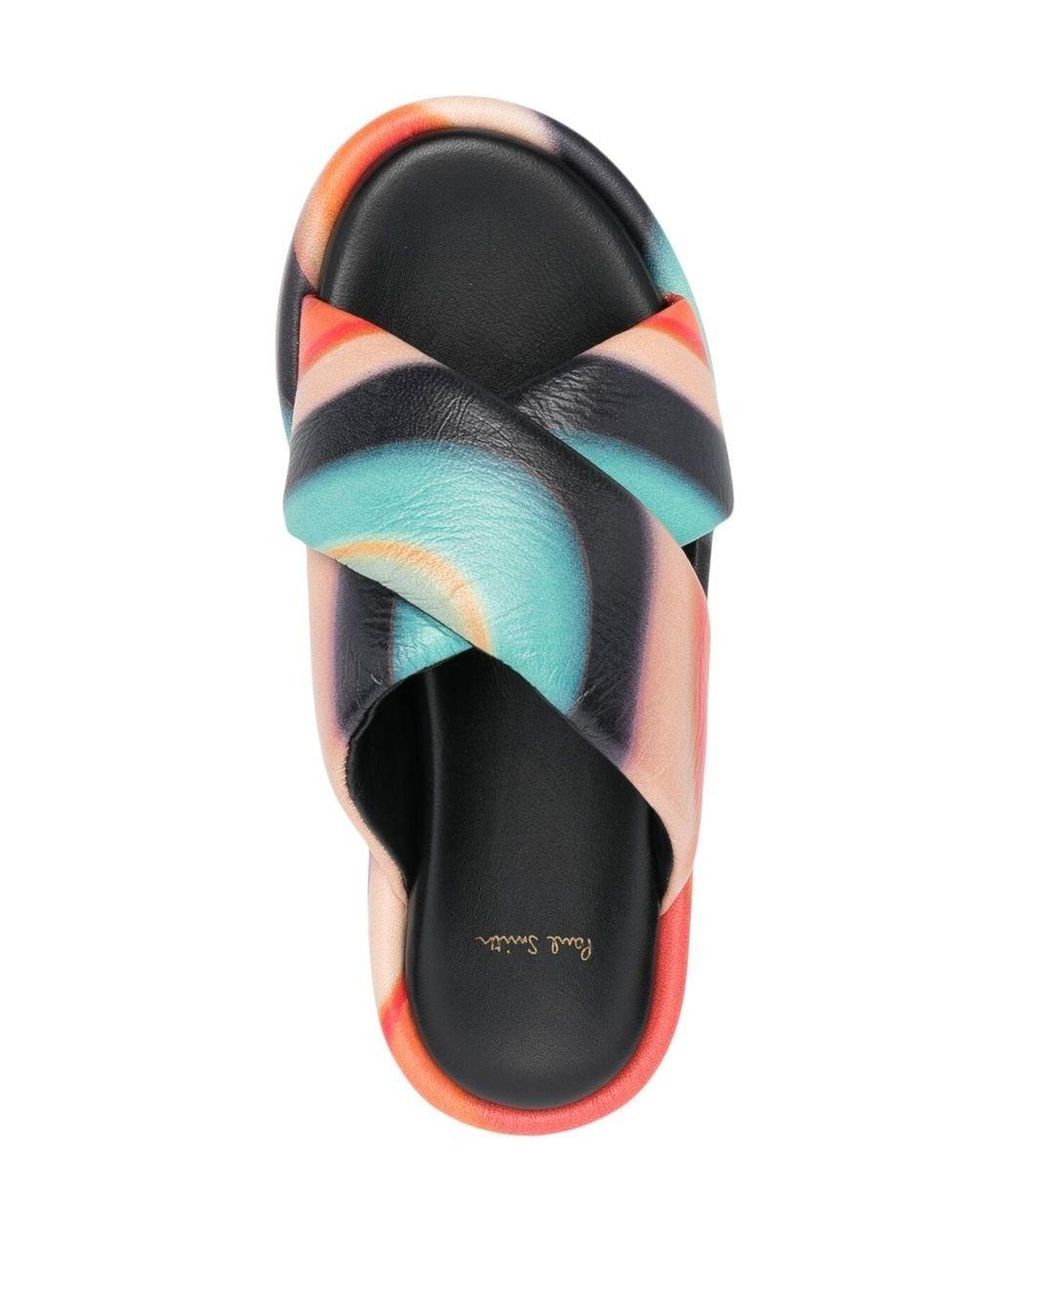 Paul Smith Roux Sandals in Black | Lyst